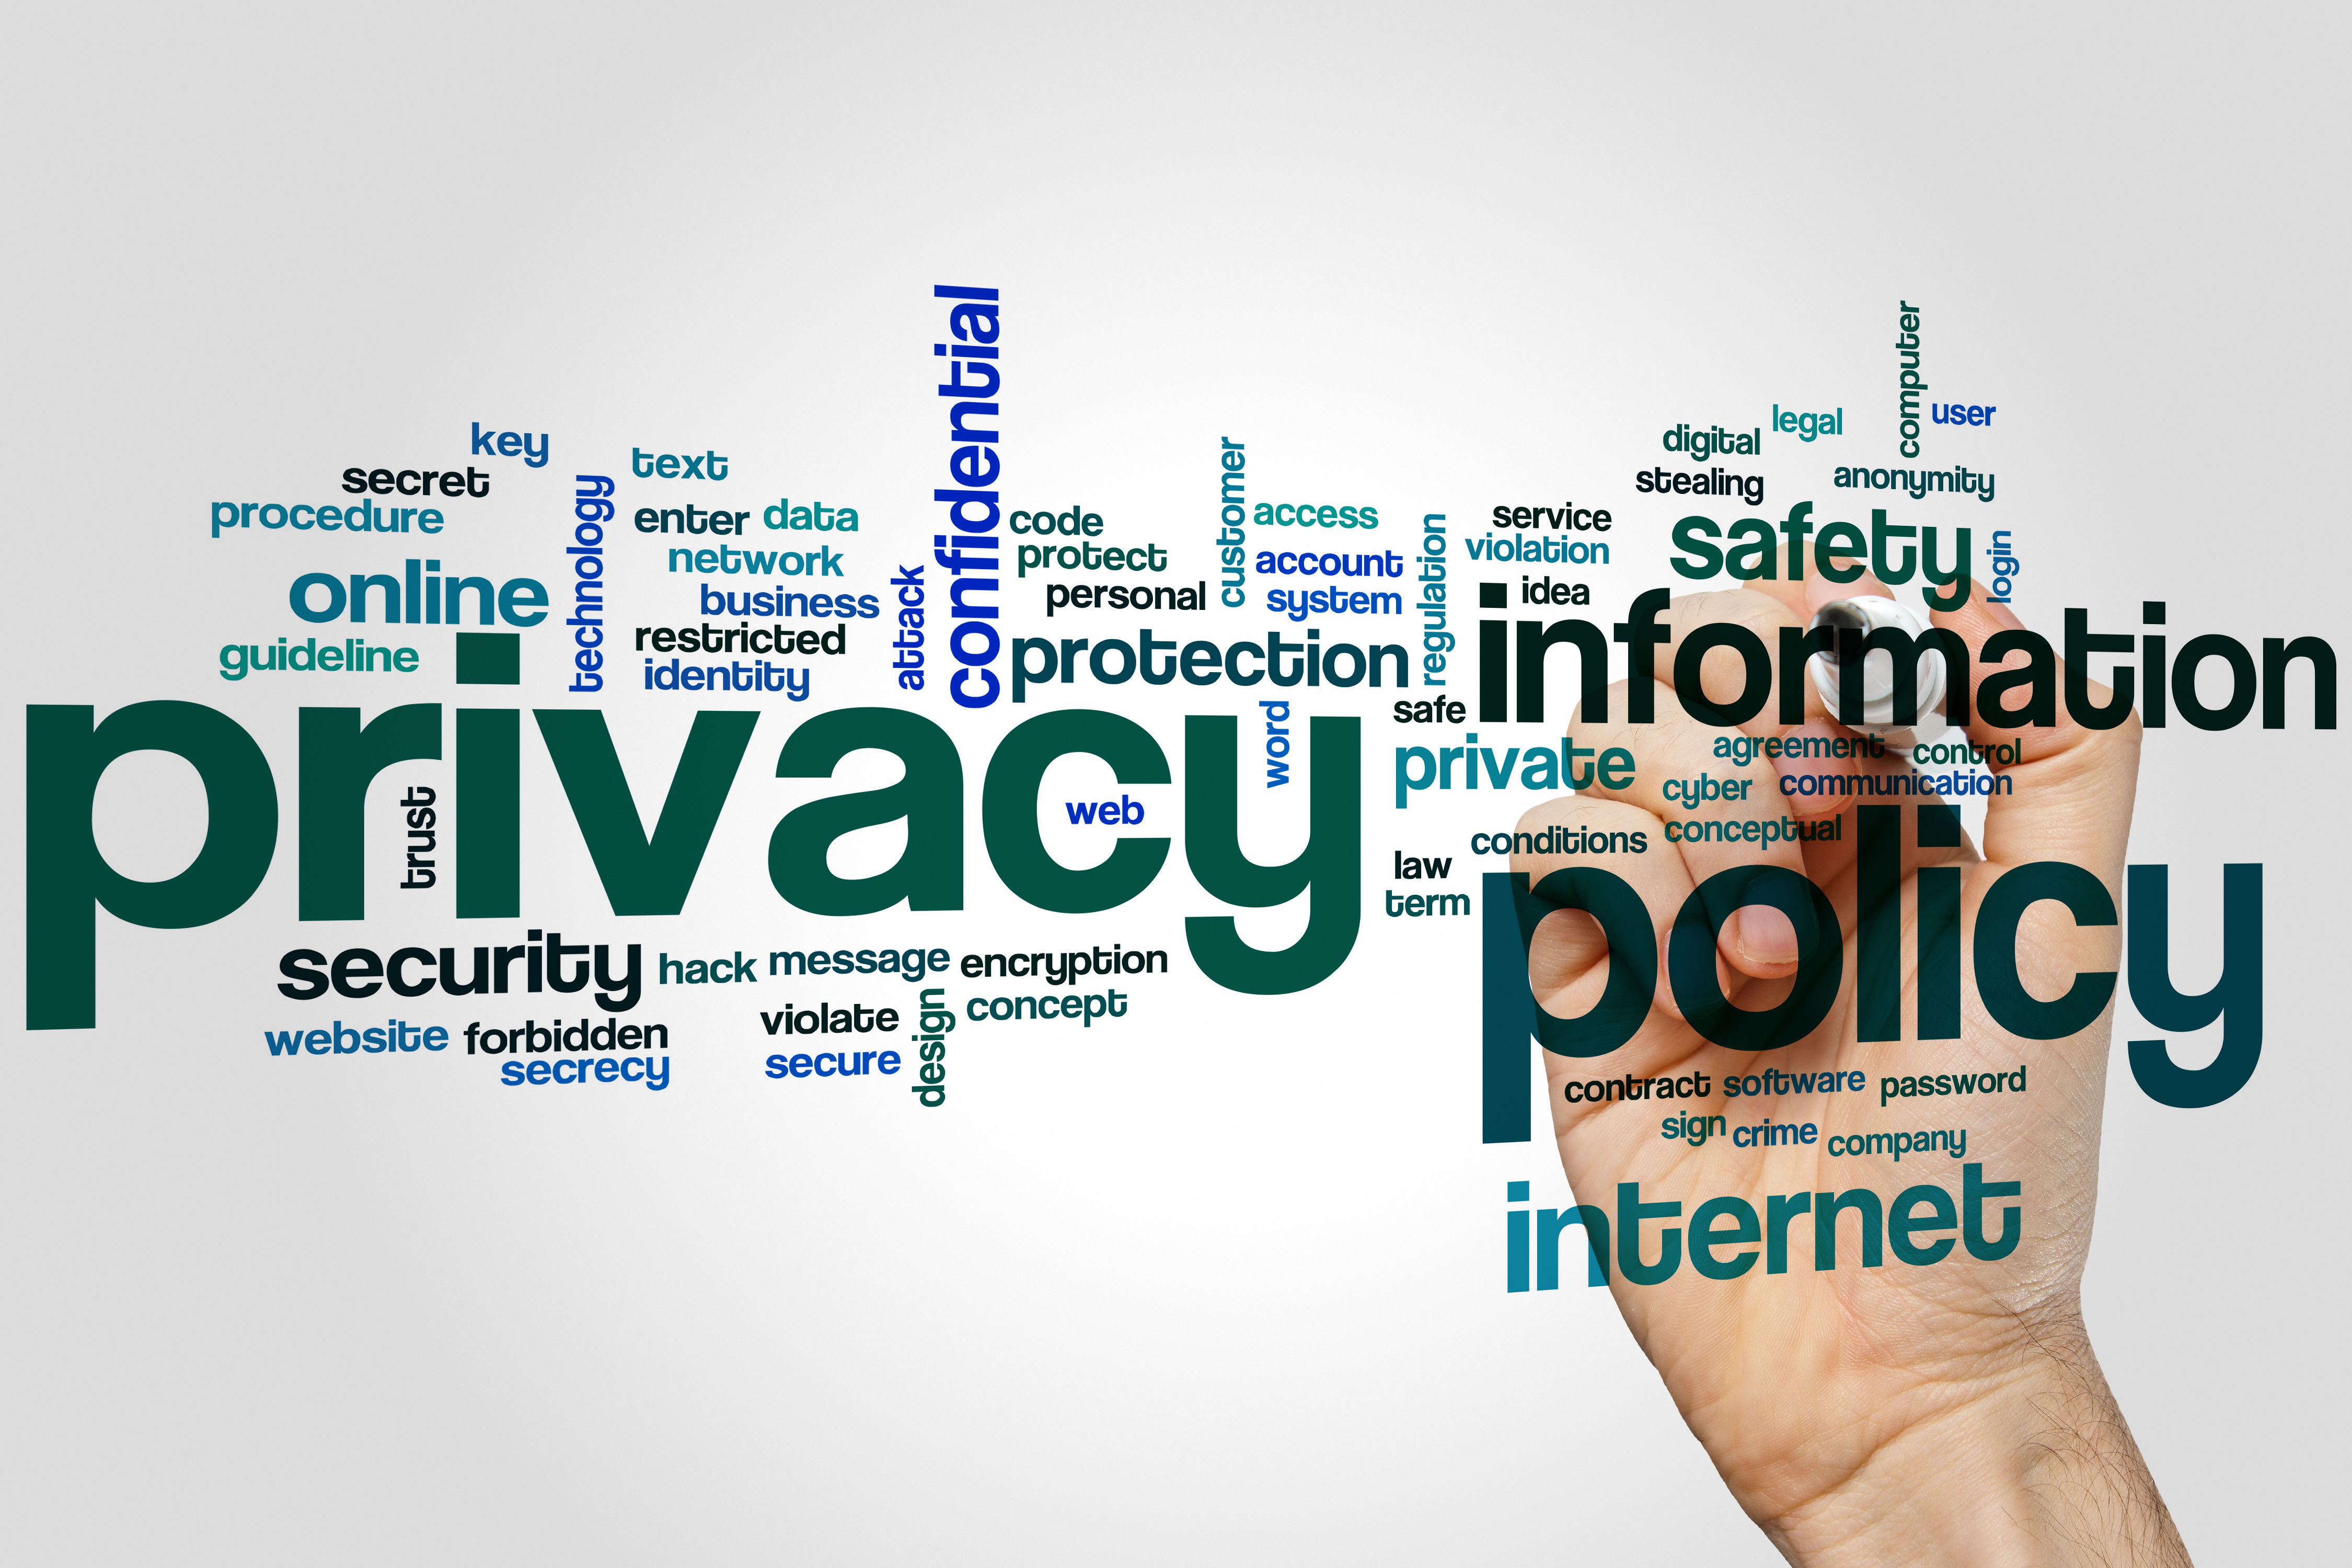 Privacy policy word cloud concept